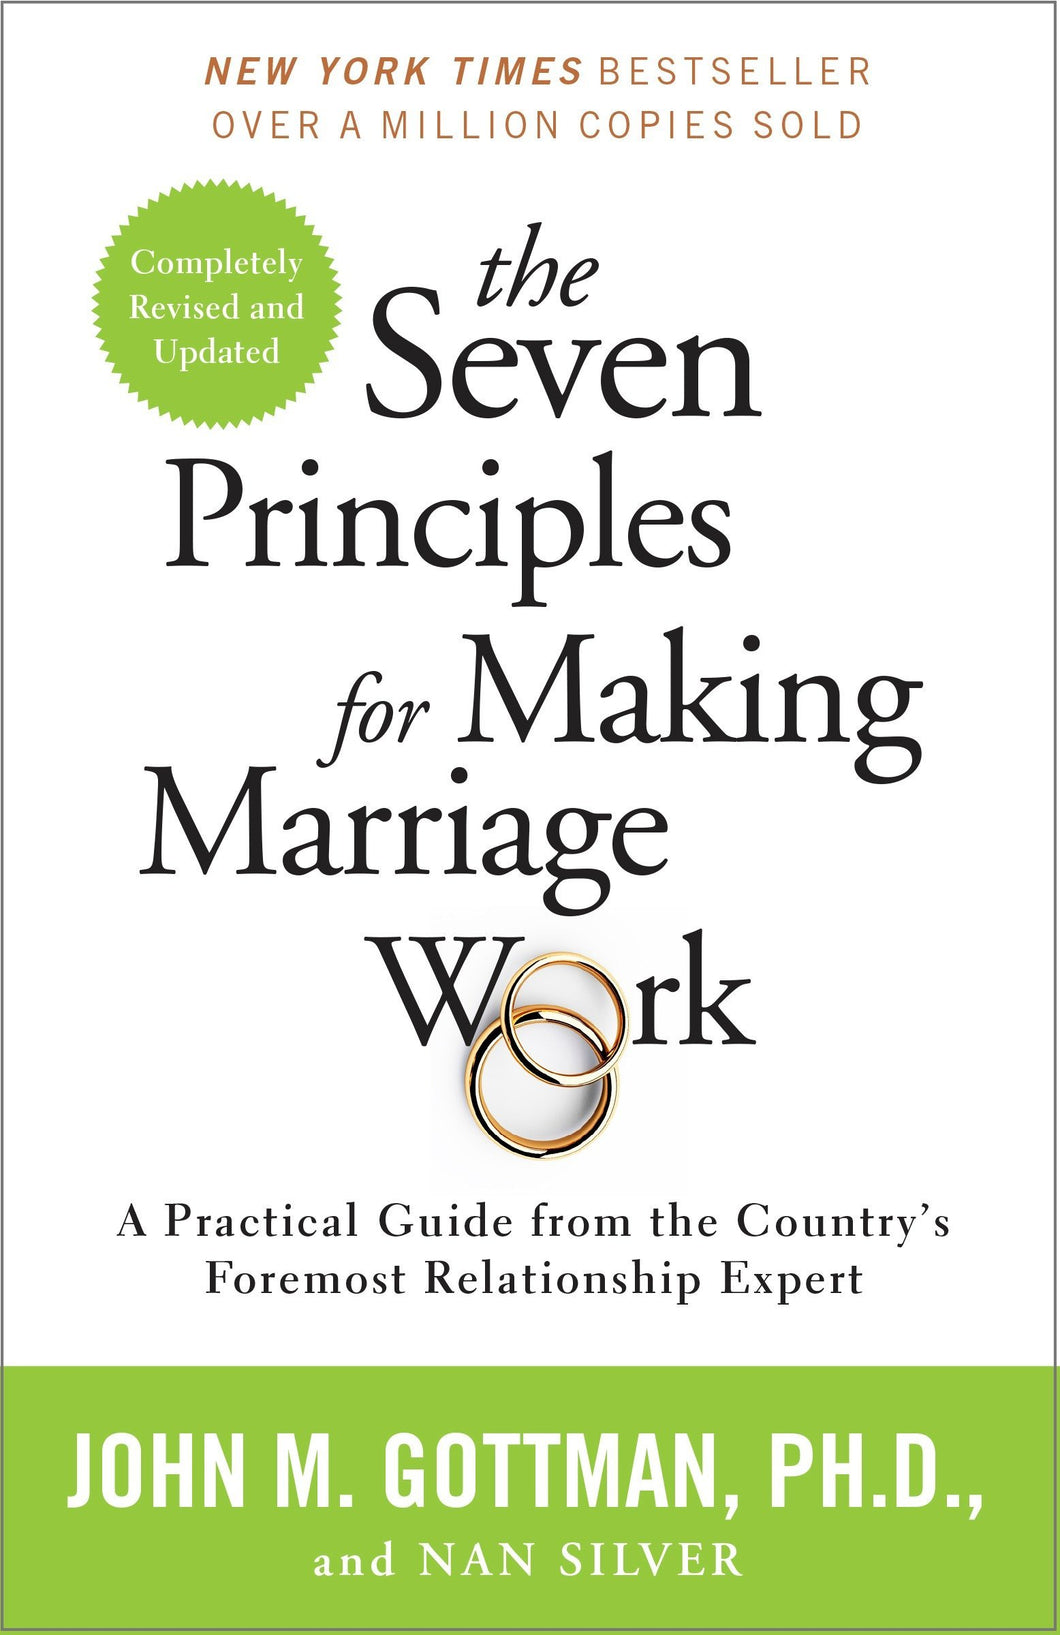 The Seven Principles for Making Marriage Work: A Practical Guide from the Country's Foremost Relationship Expert by Dr. John Gottman